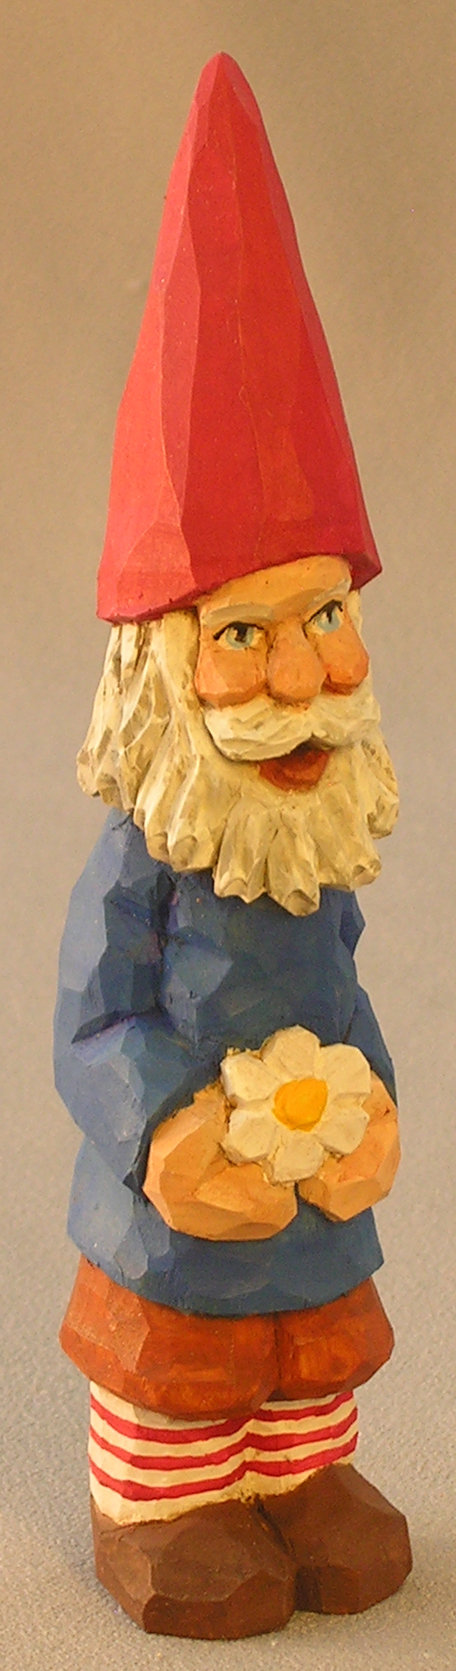 Wood Carving, Woodland Creature, Vintage Style Wood Carving, Hand Carved Original, Hand Carved Gnome Holding Daisy SA13 6.5 X 1.5 X 1.5 picture